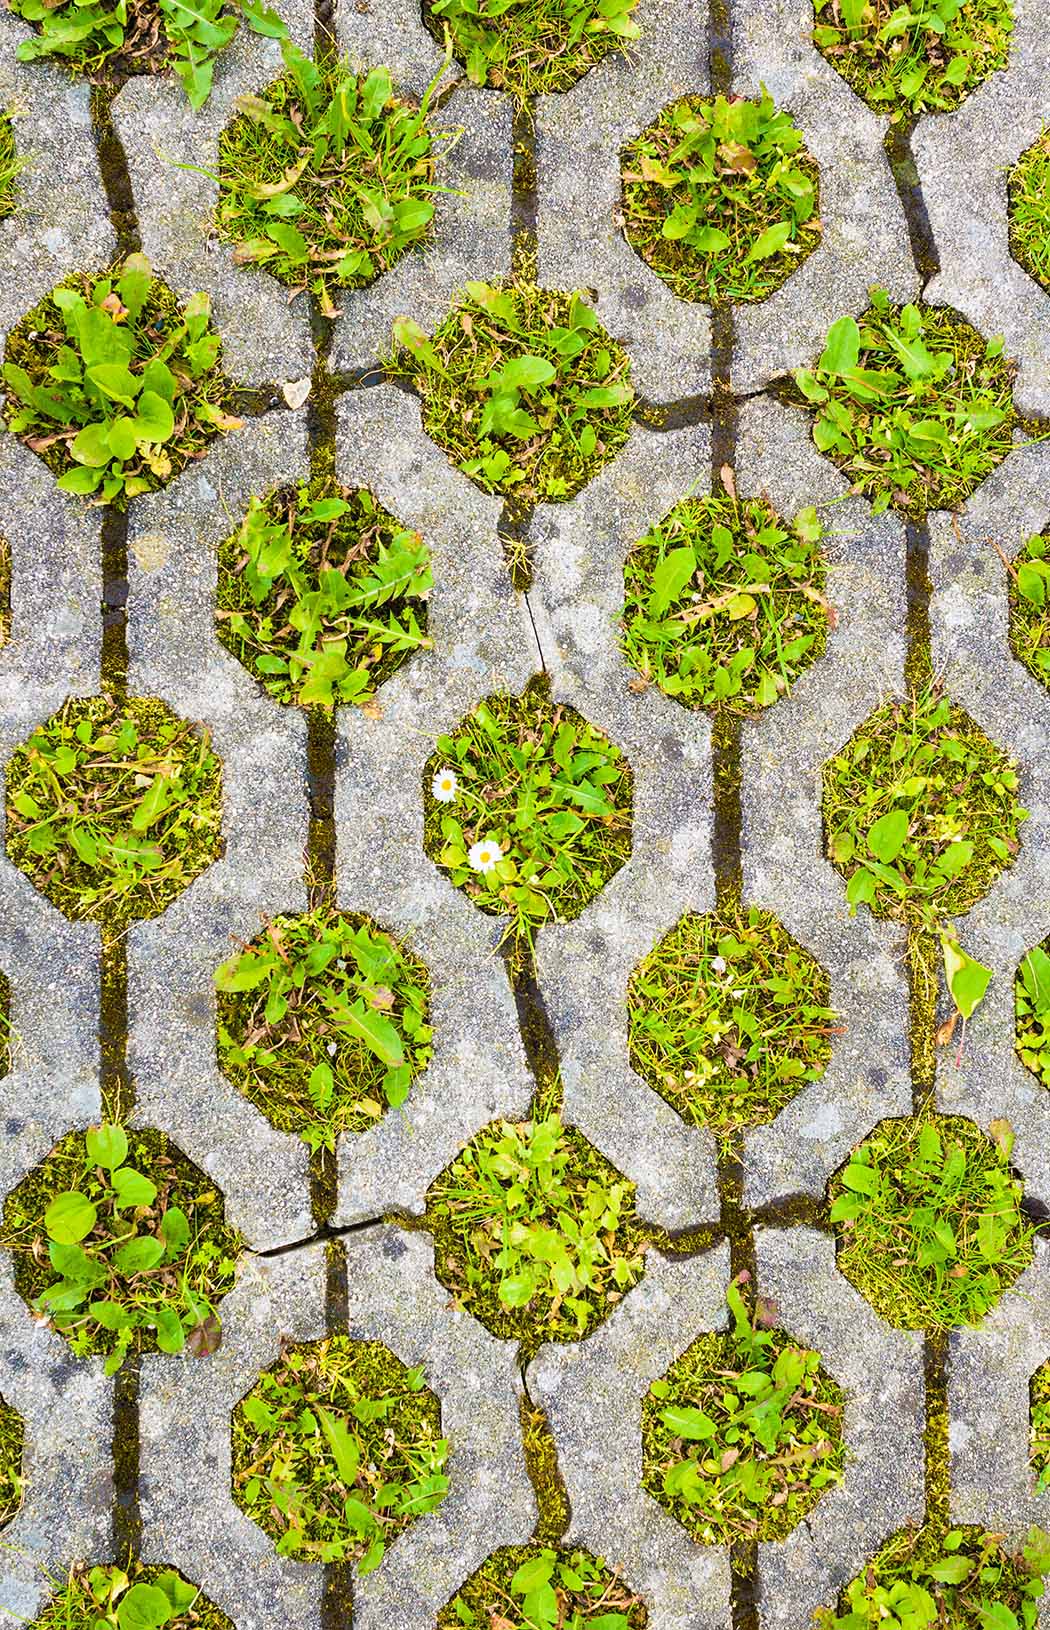 permeable-pavement-with-grass-eco-friendly-parking